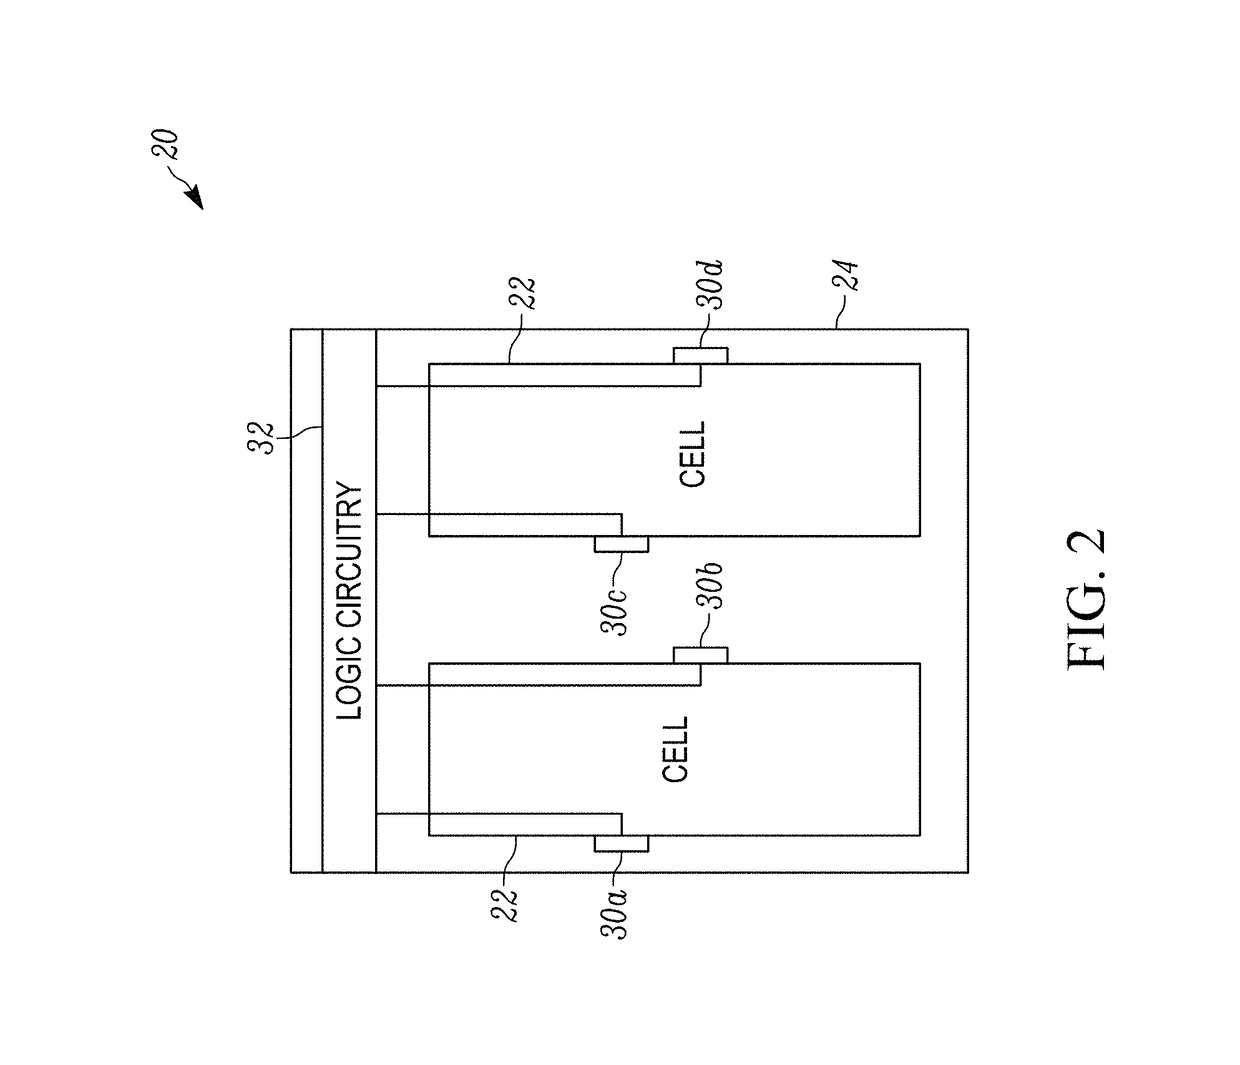 Method and apparatus to detect and manage battery pack cell swell